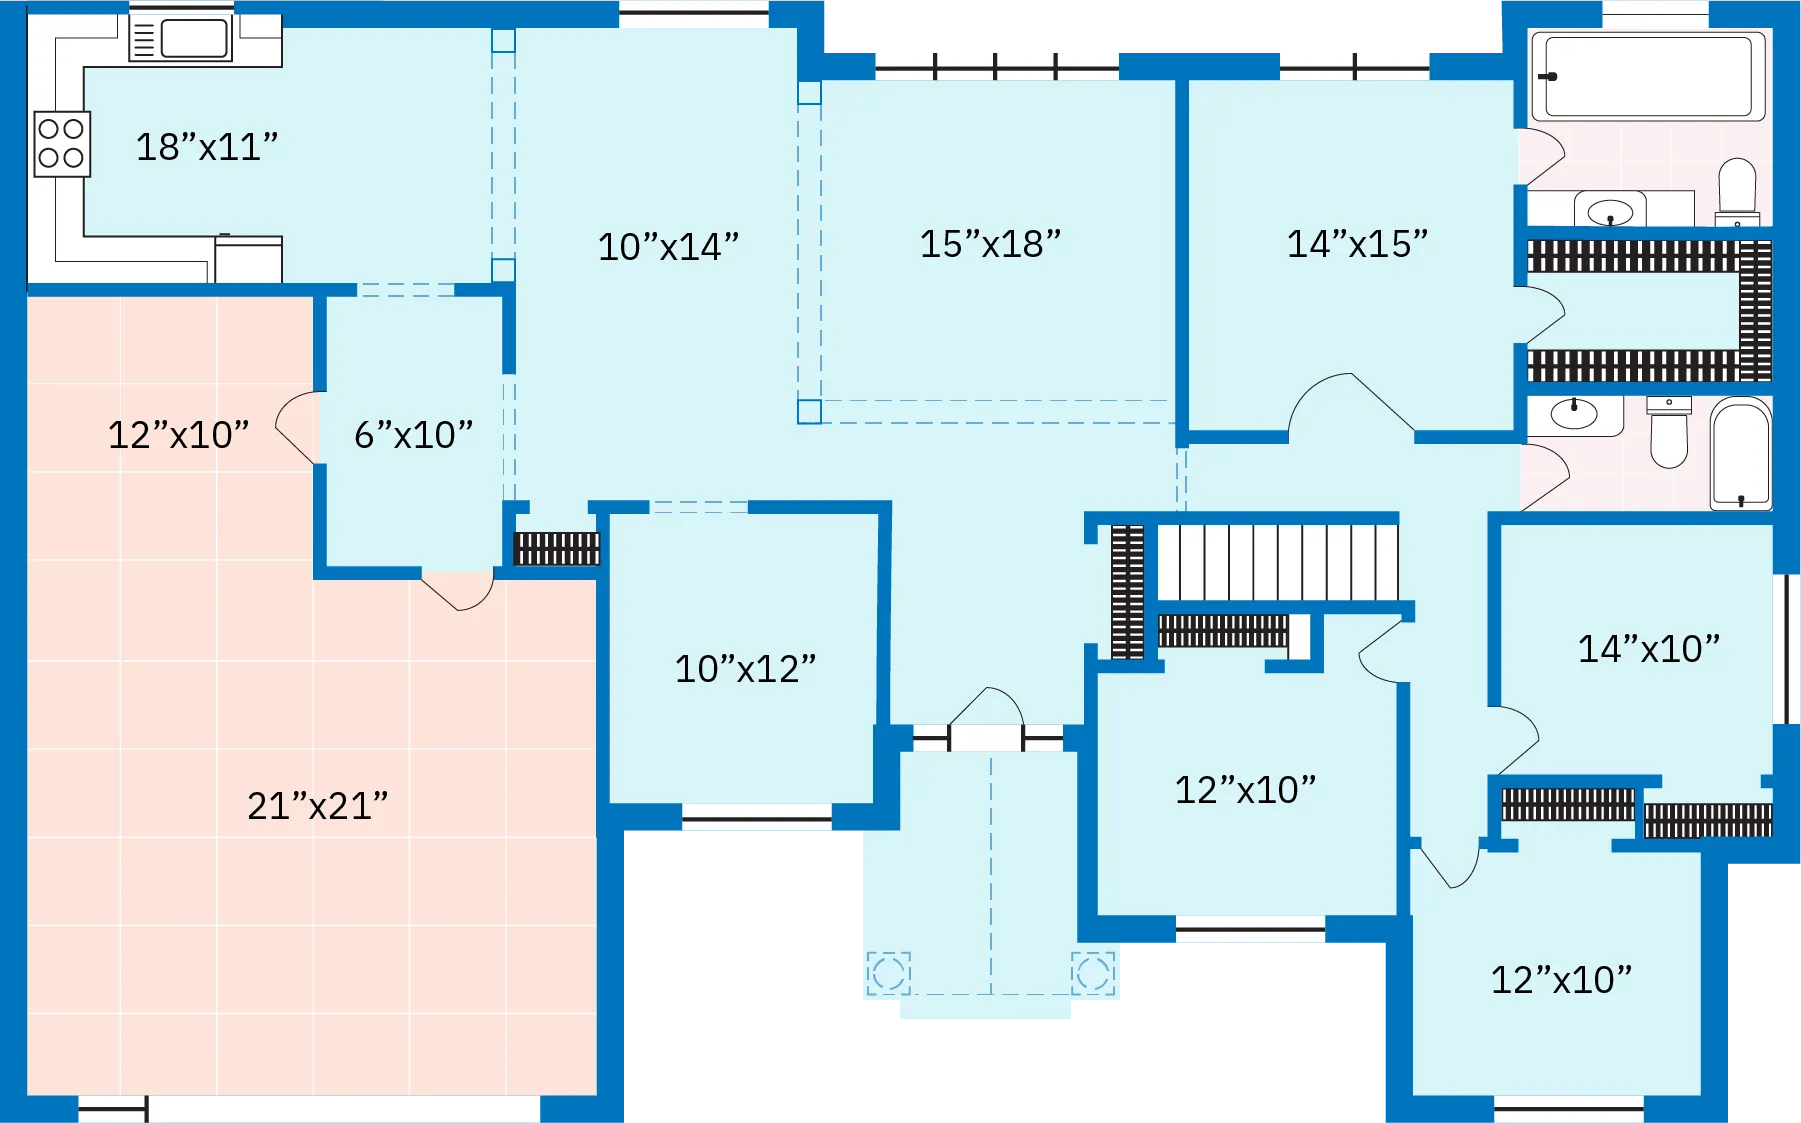 The floor plan of a 21st-century middle-class American home. The floor plan depicts a one-floor house with a kitchen, four bedrooms, two bathrooms, a family room, den, steps down to a basement, and an attached two car garage.